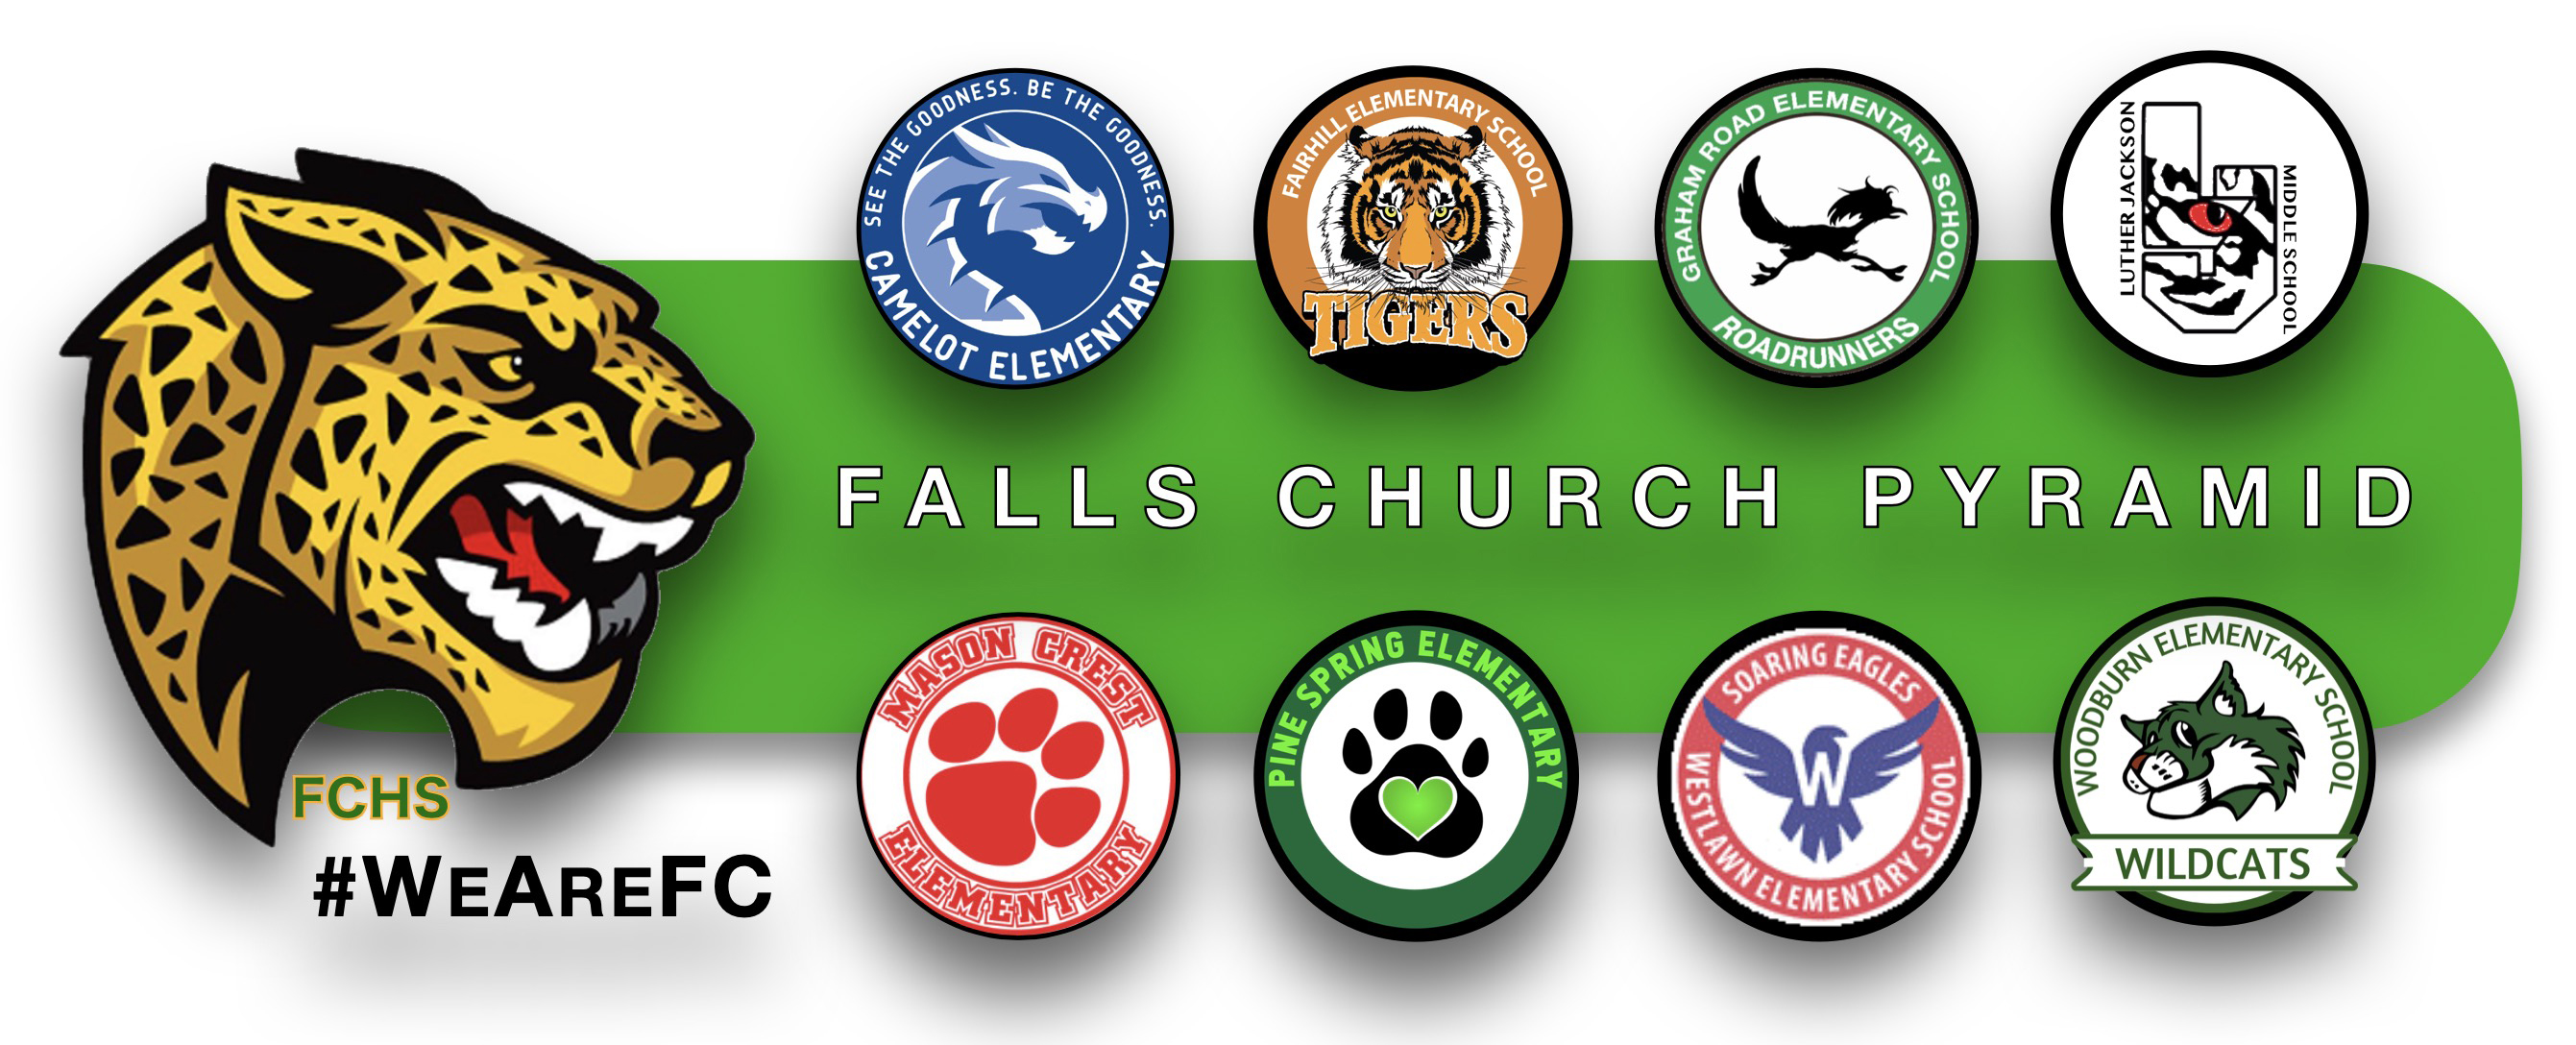 All of the logos of the Falls Church pyramid schools.